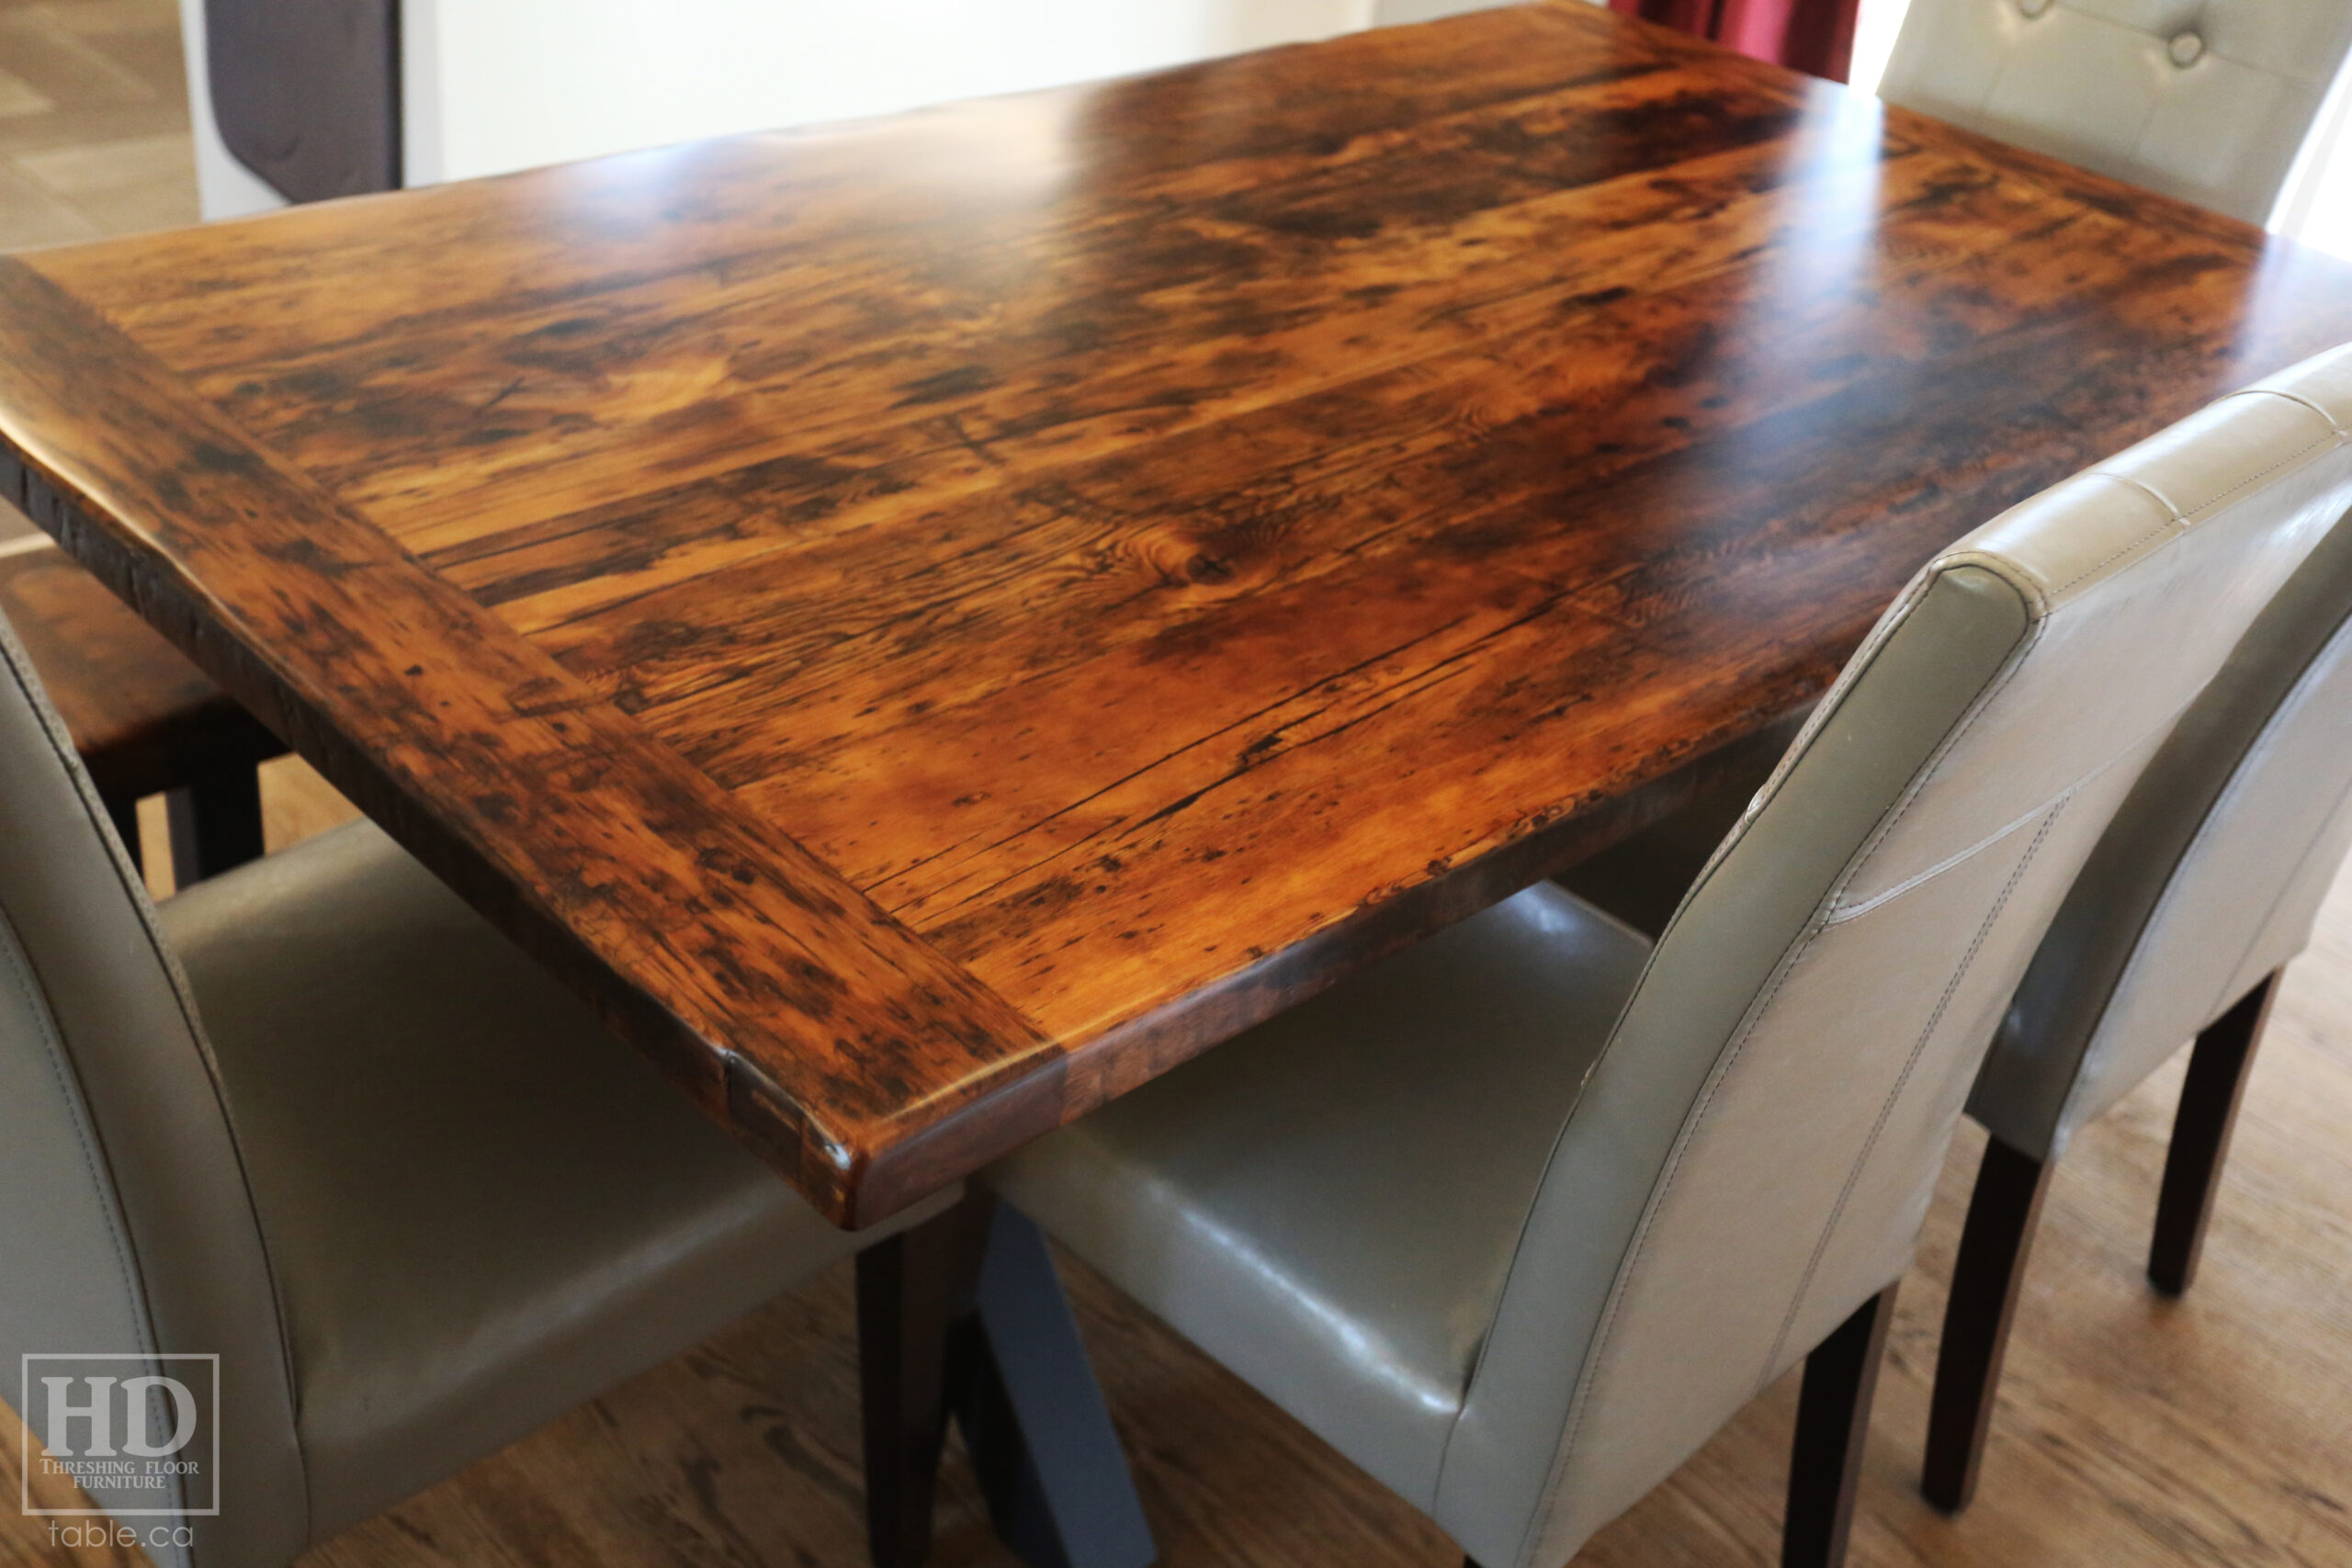 68" Ontario Barnwood Table we made for an Kitchener, Ontario home - 40" wide - Matte Black X Base - 2" Hemlock Threshing Floor Top -  Original edges & distressing maintained - Premium epoxy + satin polyurethane finish - Two 18" Leaves - 68" [matching] Reclaimed Wood Bench - www.table.ca